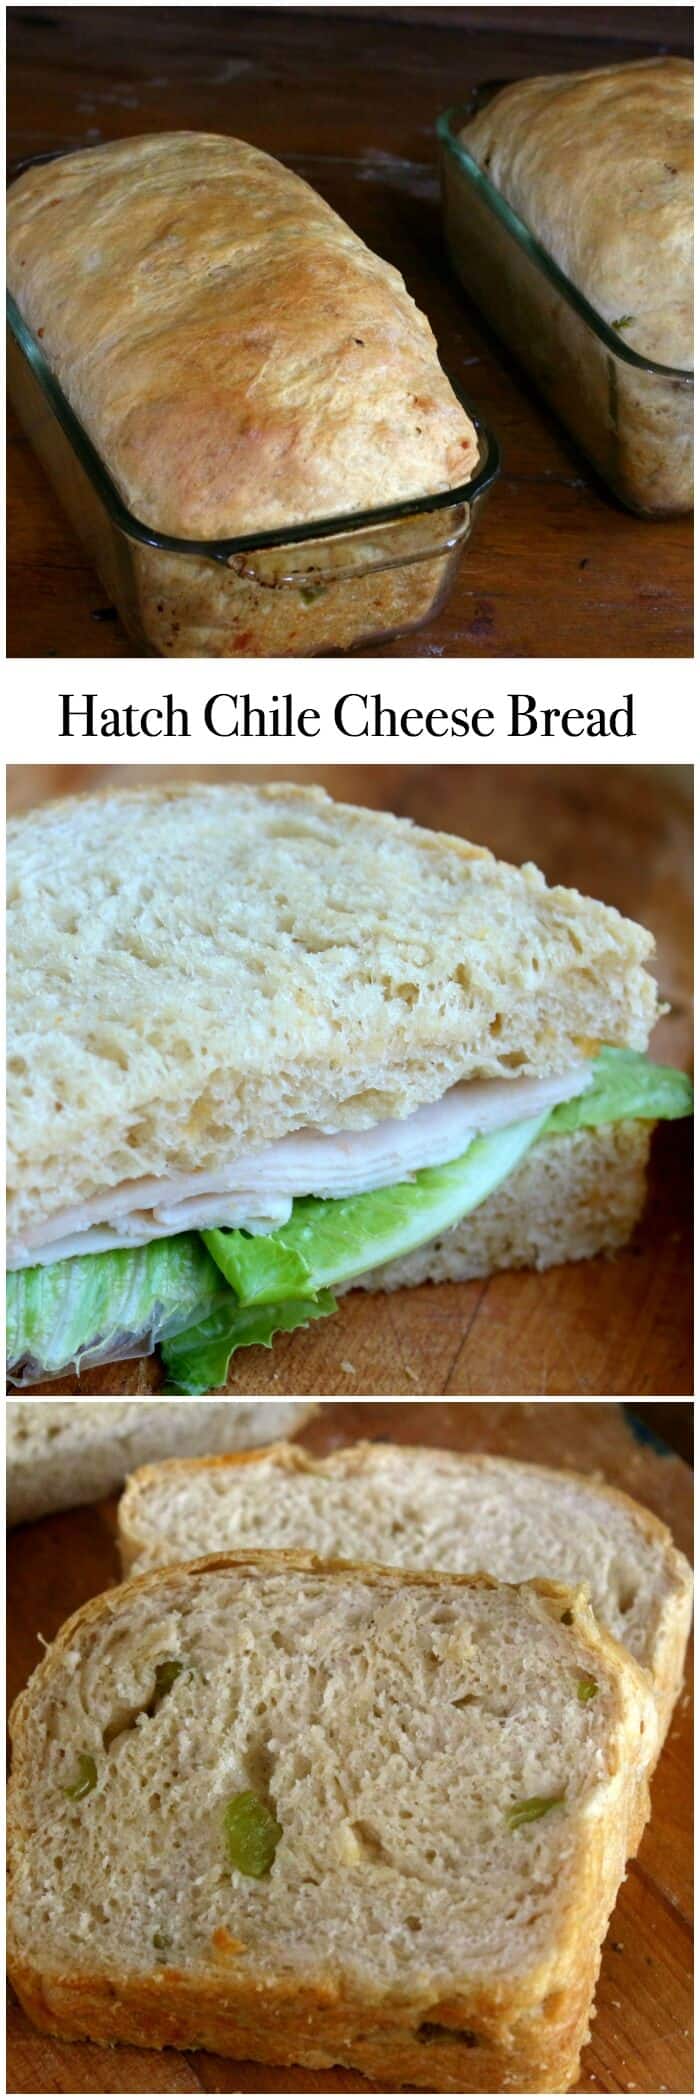 Hatch Chile Cheese Bread is a tender, airy bread with a crispy crust and a smoky spicy flavor that makes great sandwiches! From RestlessChipotle.com